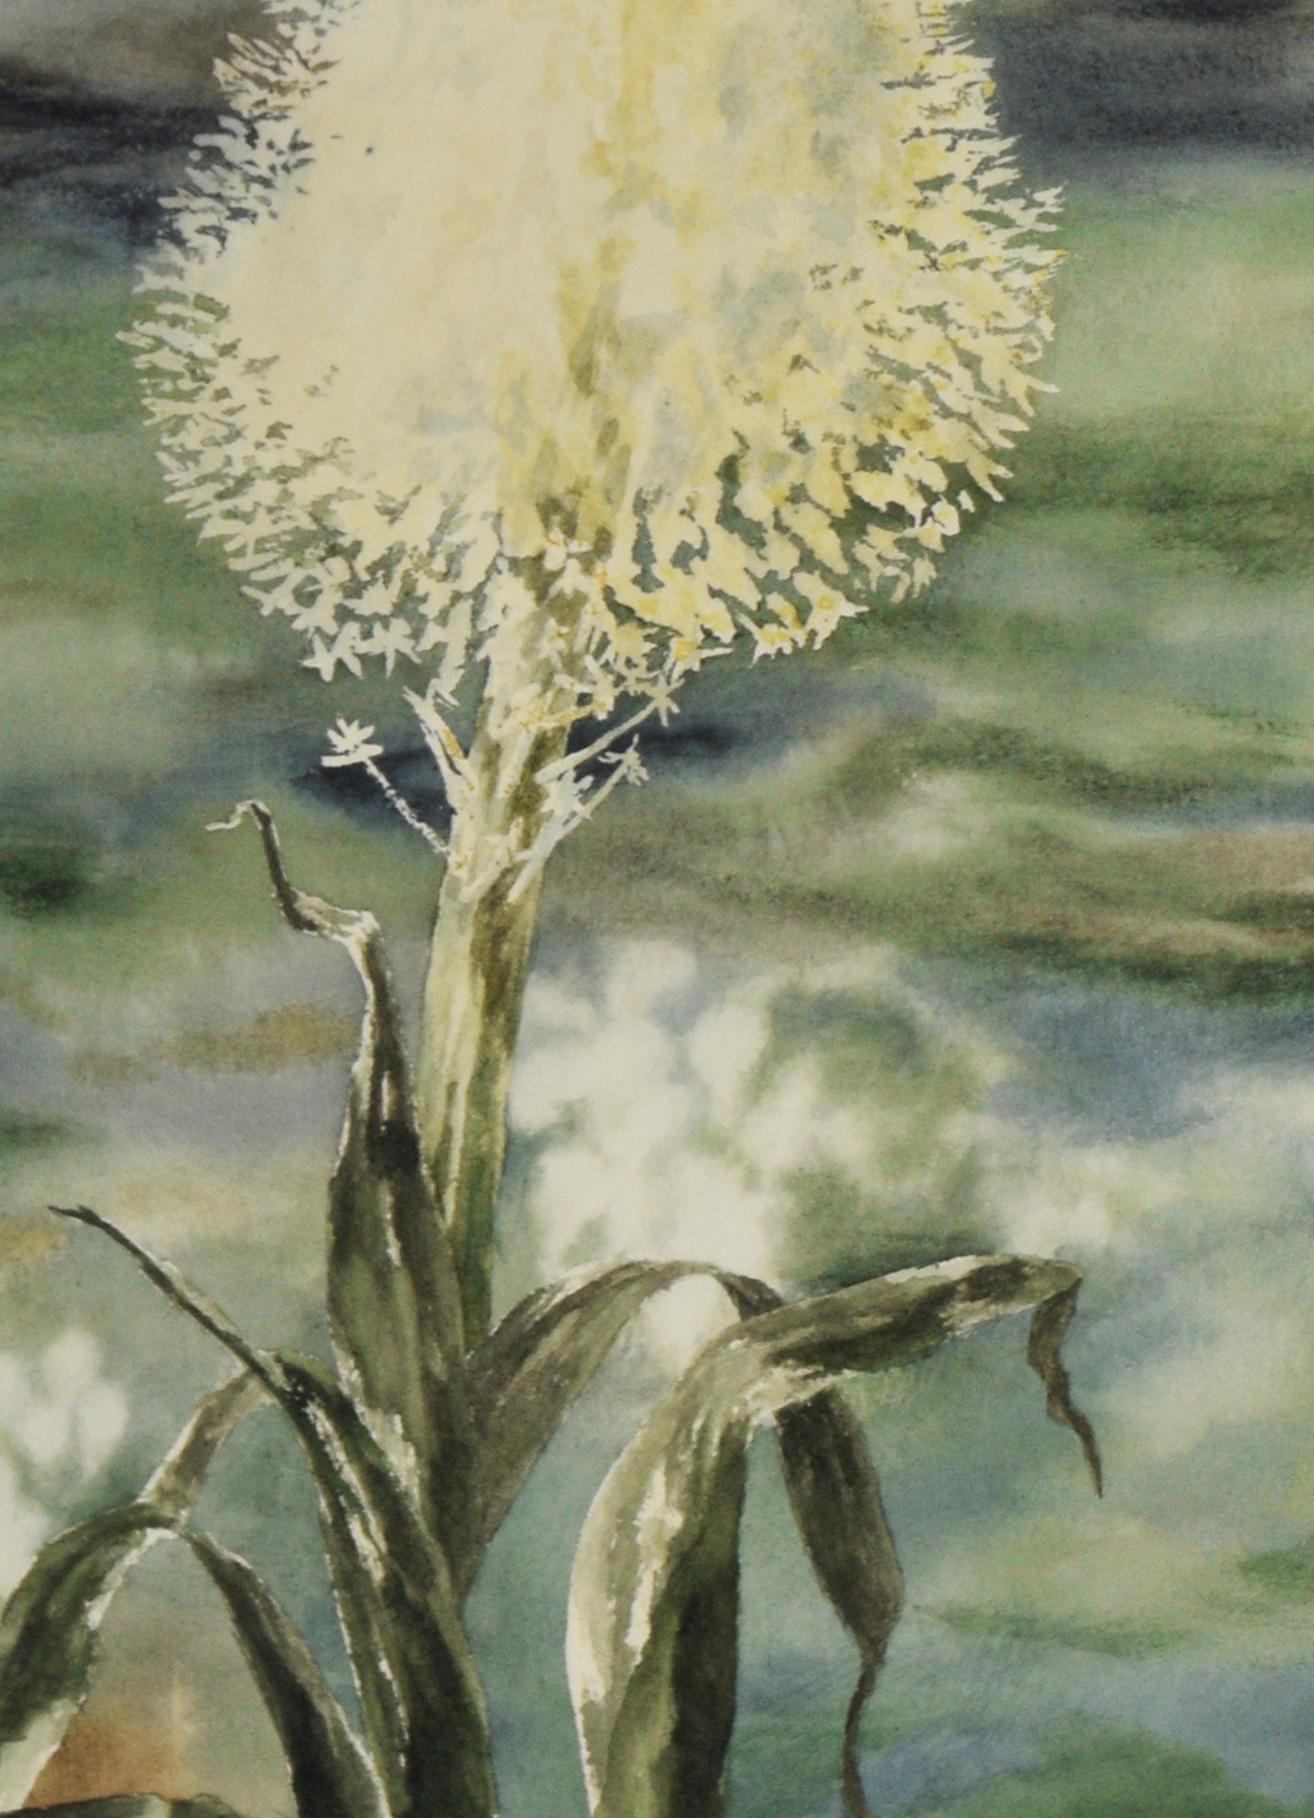 Beargrass - Original Watercolor on Paper

Original watercolor depicting beargrass, also known as horse tail, by Marie Yunker (American, 20th C). Hues of greens and blues take up the background while the beargrass is shown as the focal point. 
Signed